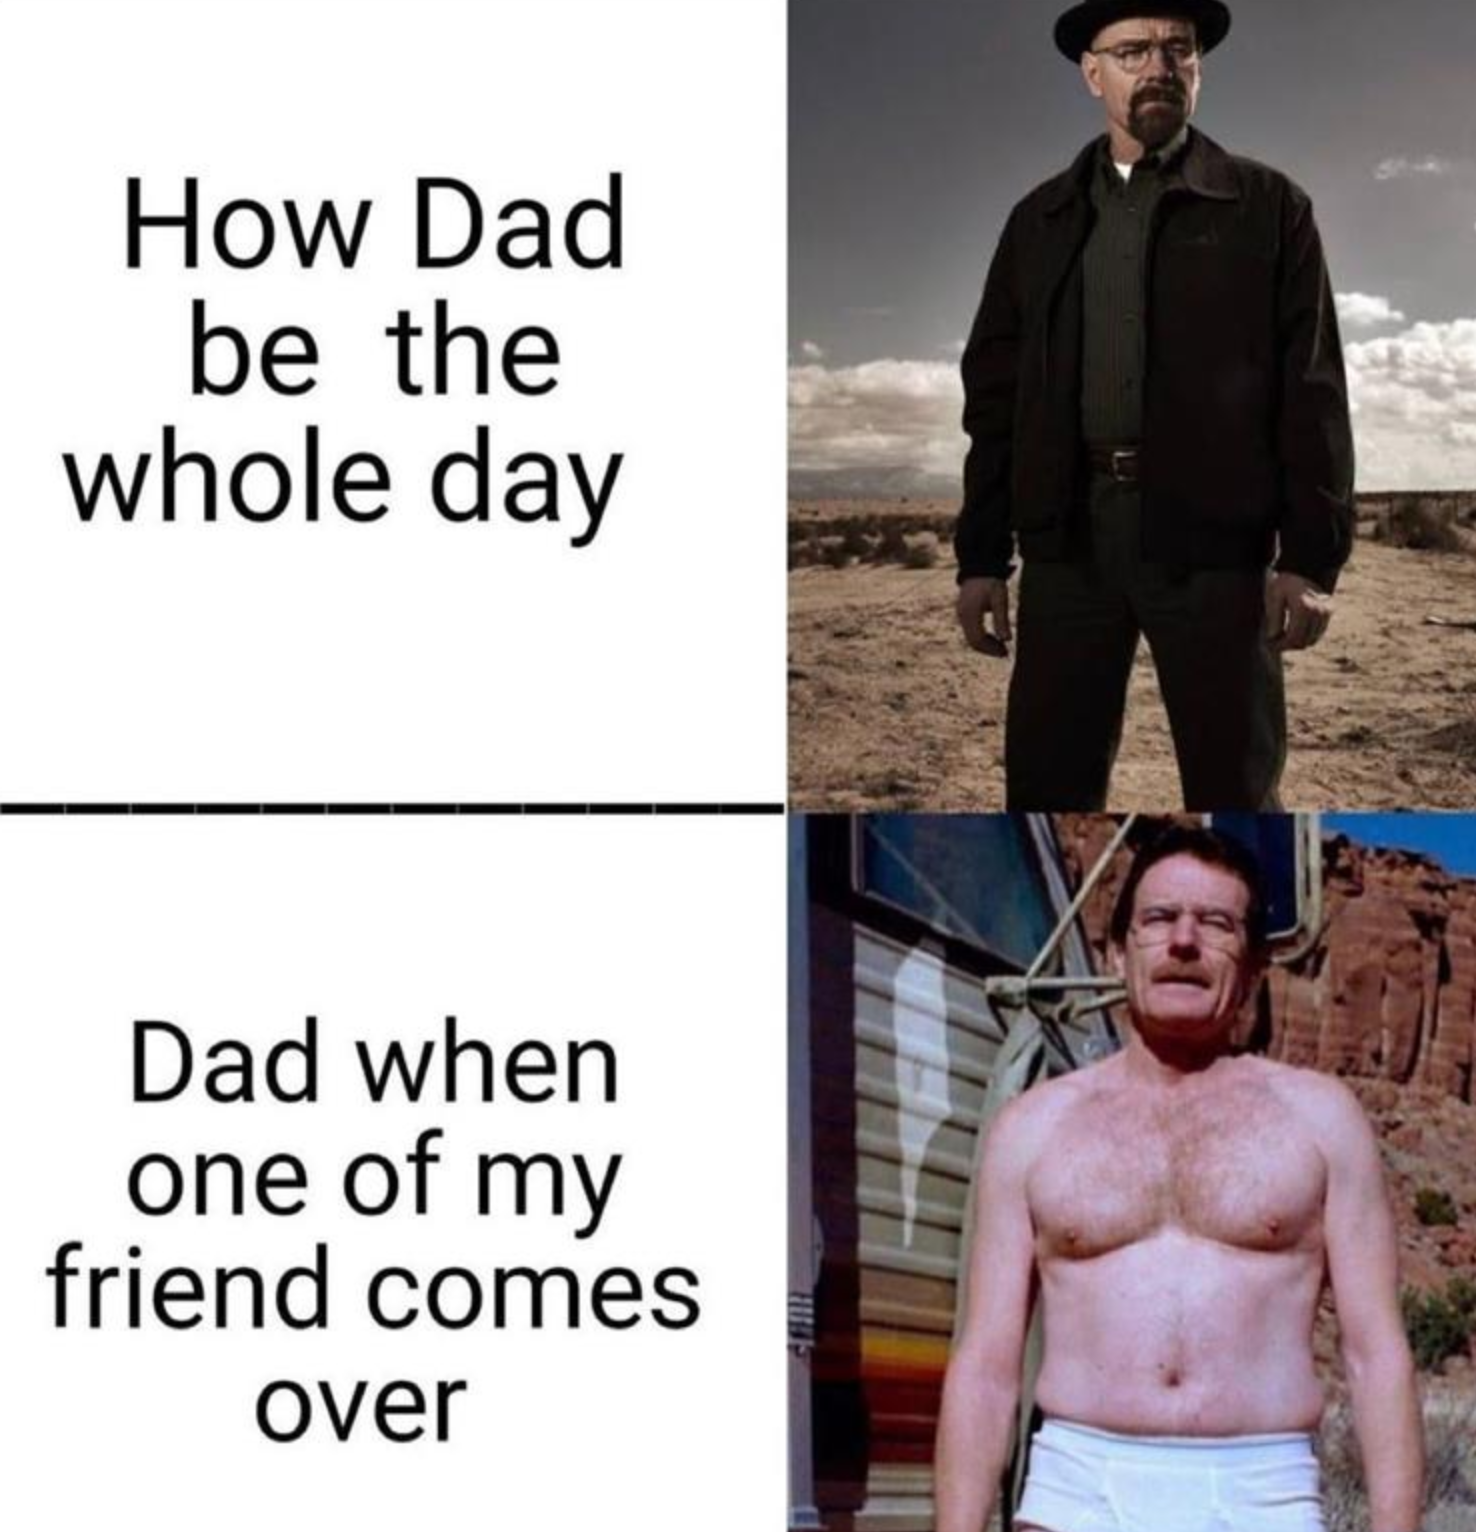 dad memes - my dad when my friends come over meme - How Dad be the whole day Dad when one of my friend comes over tin